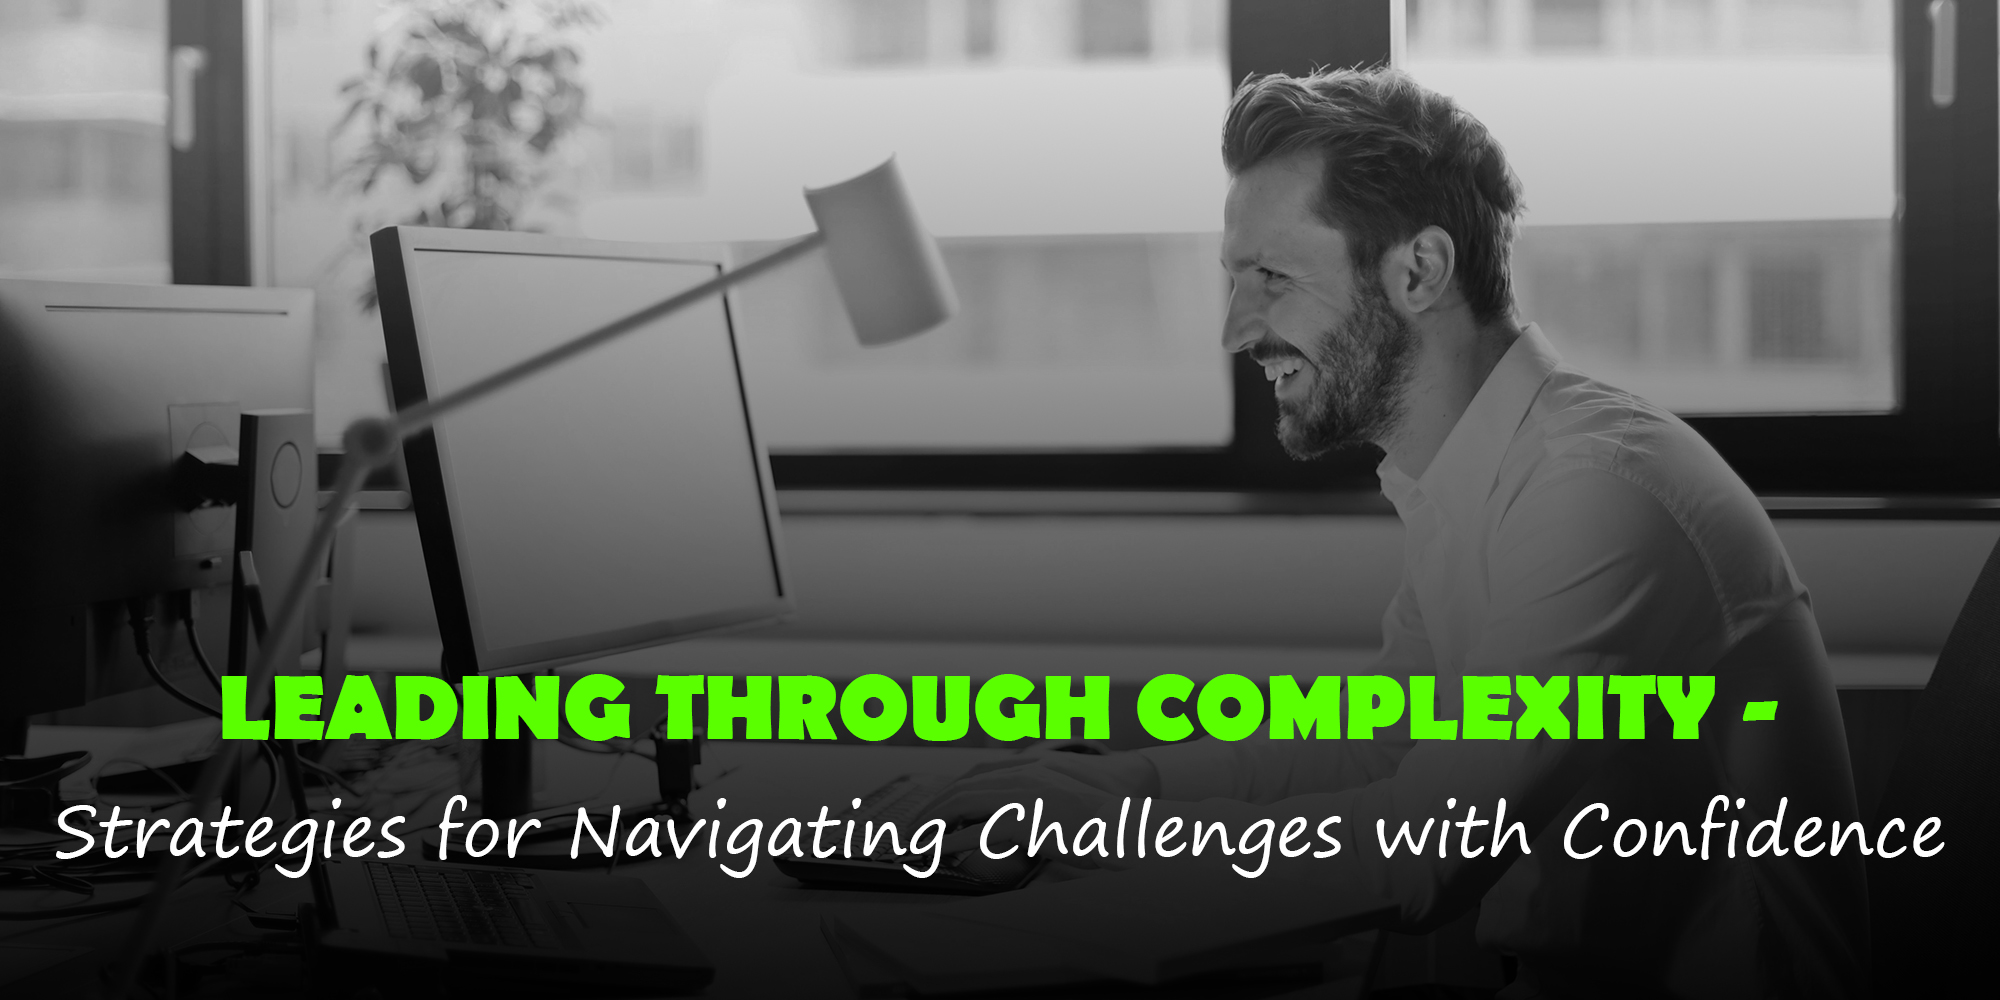 Leading Through Complexity: Strategies for Navigating Challenges with Confidence